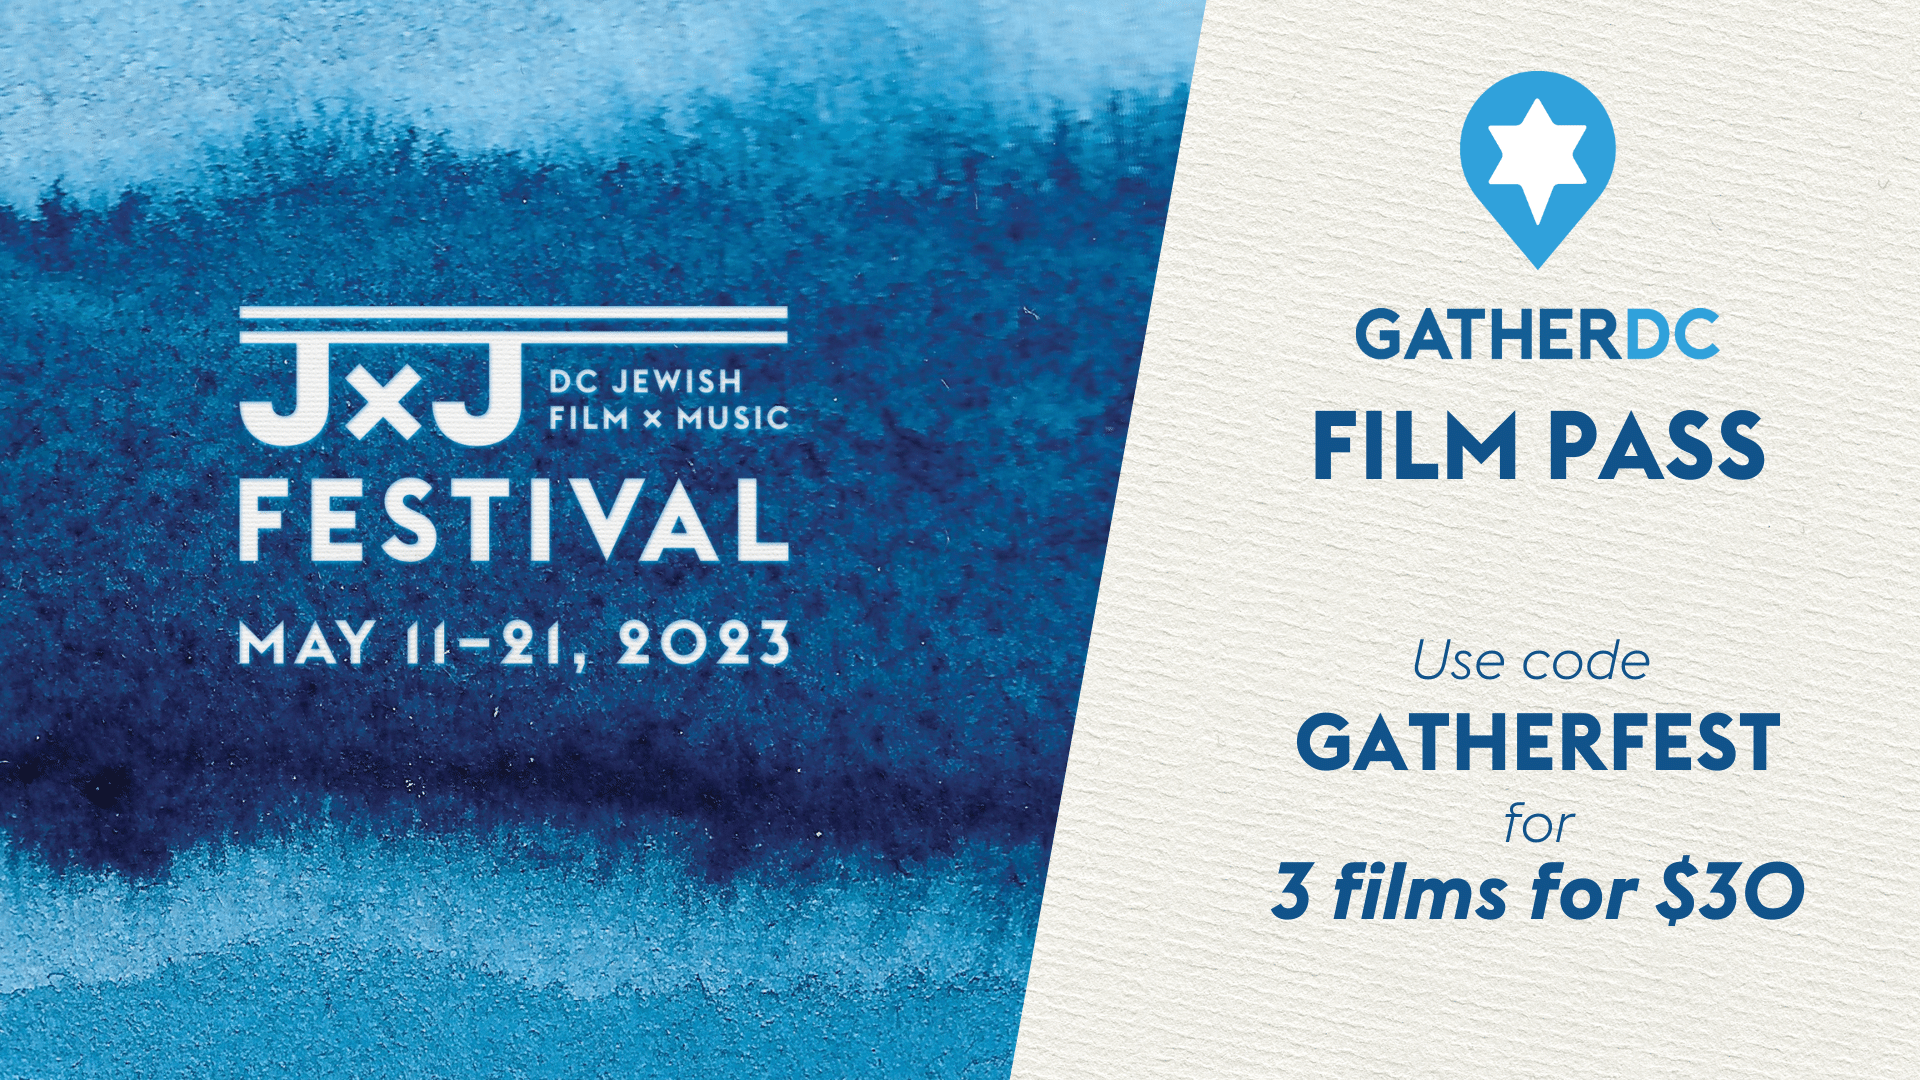 JxJ Festival; May 11-21, 2023; GatherDC film pass; Use code GATHERFEST for 3 films for $30 total